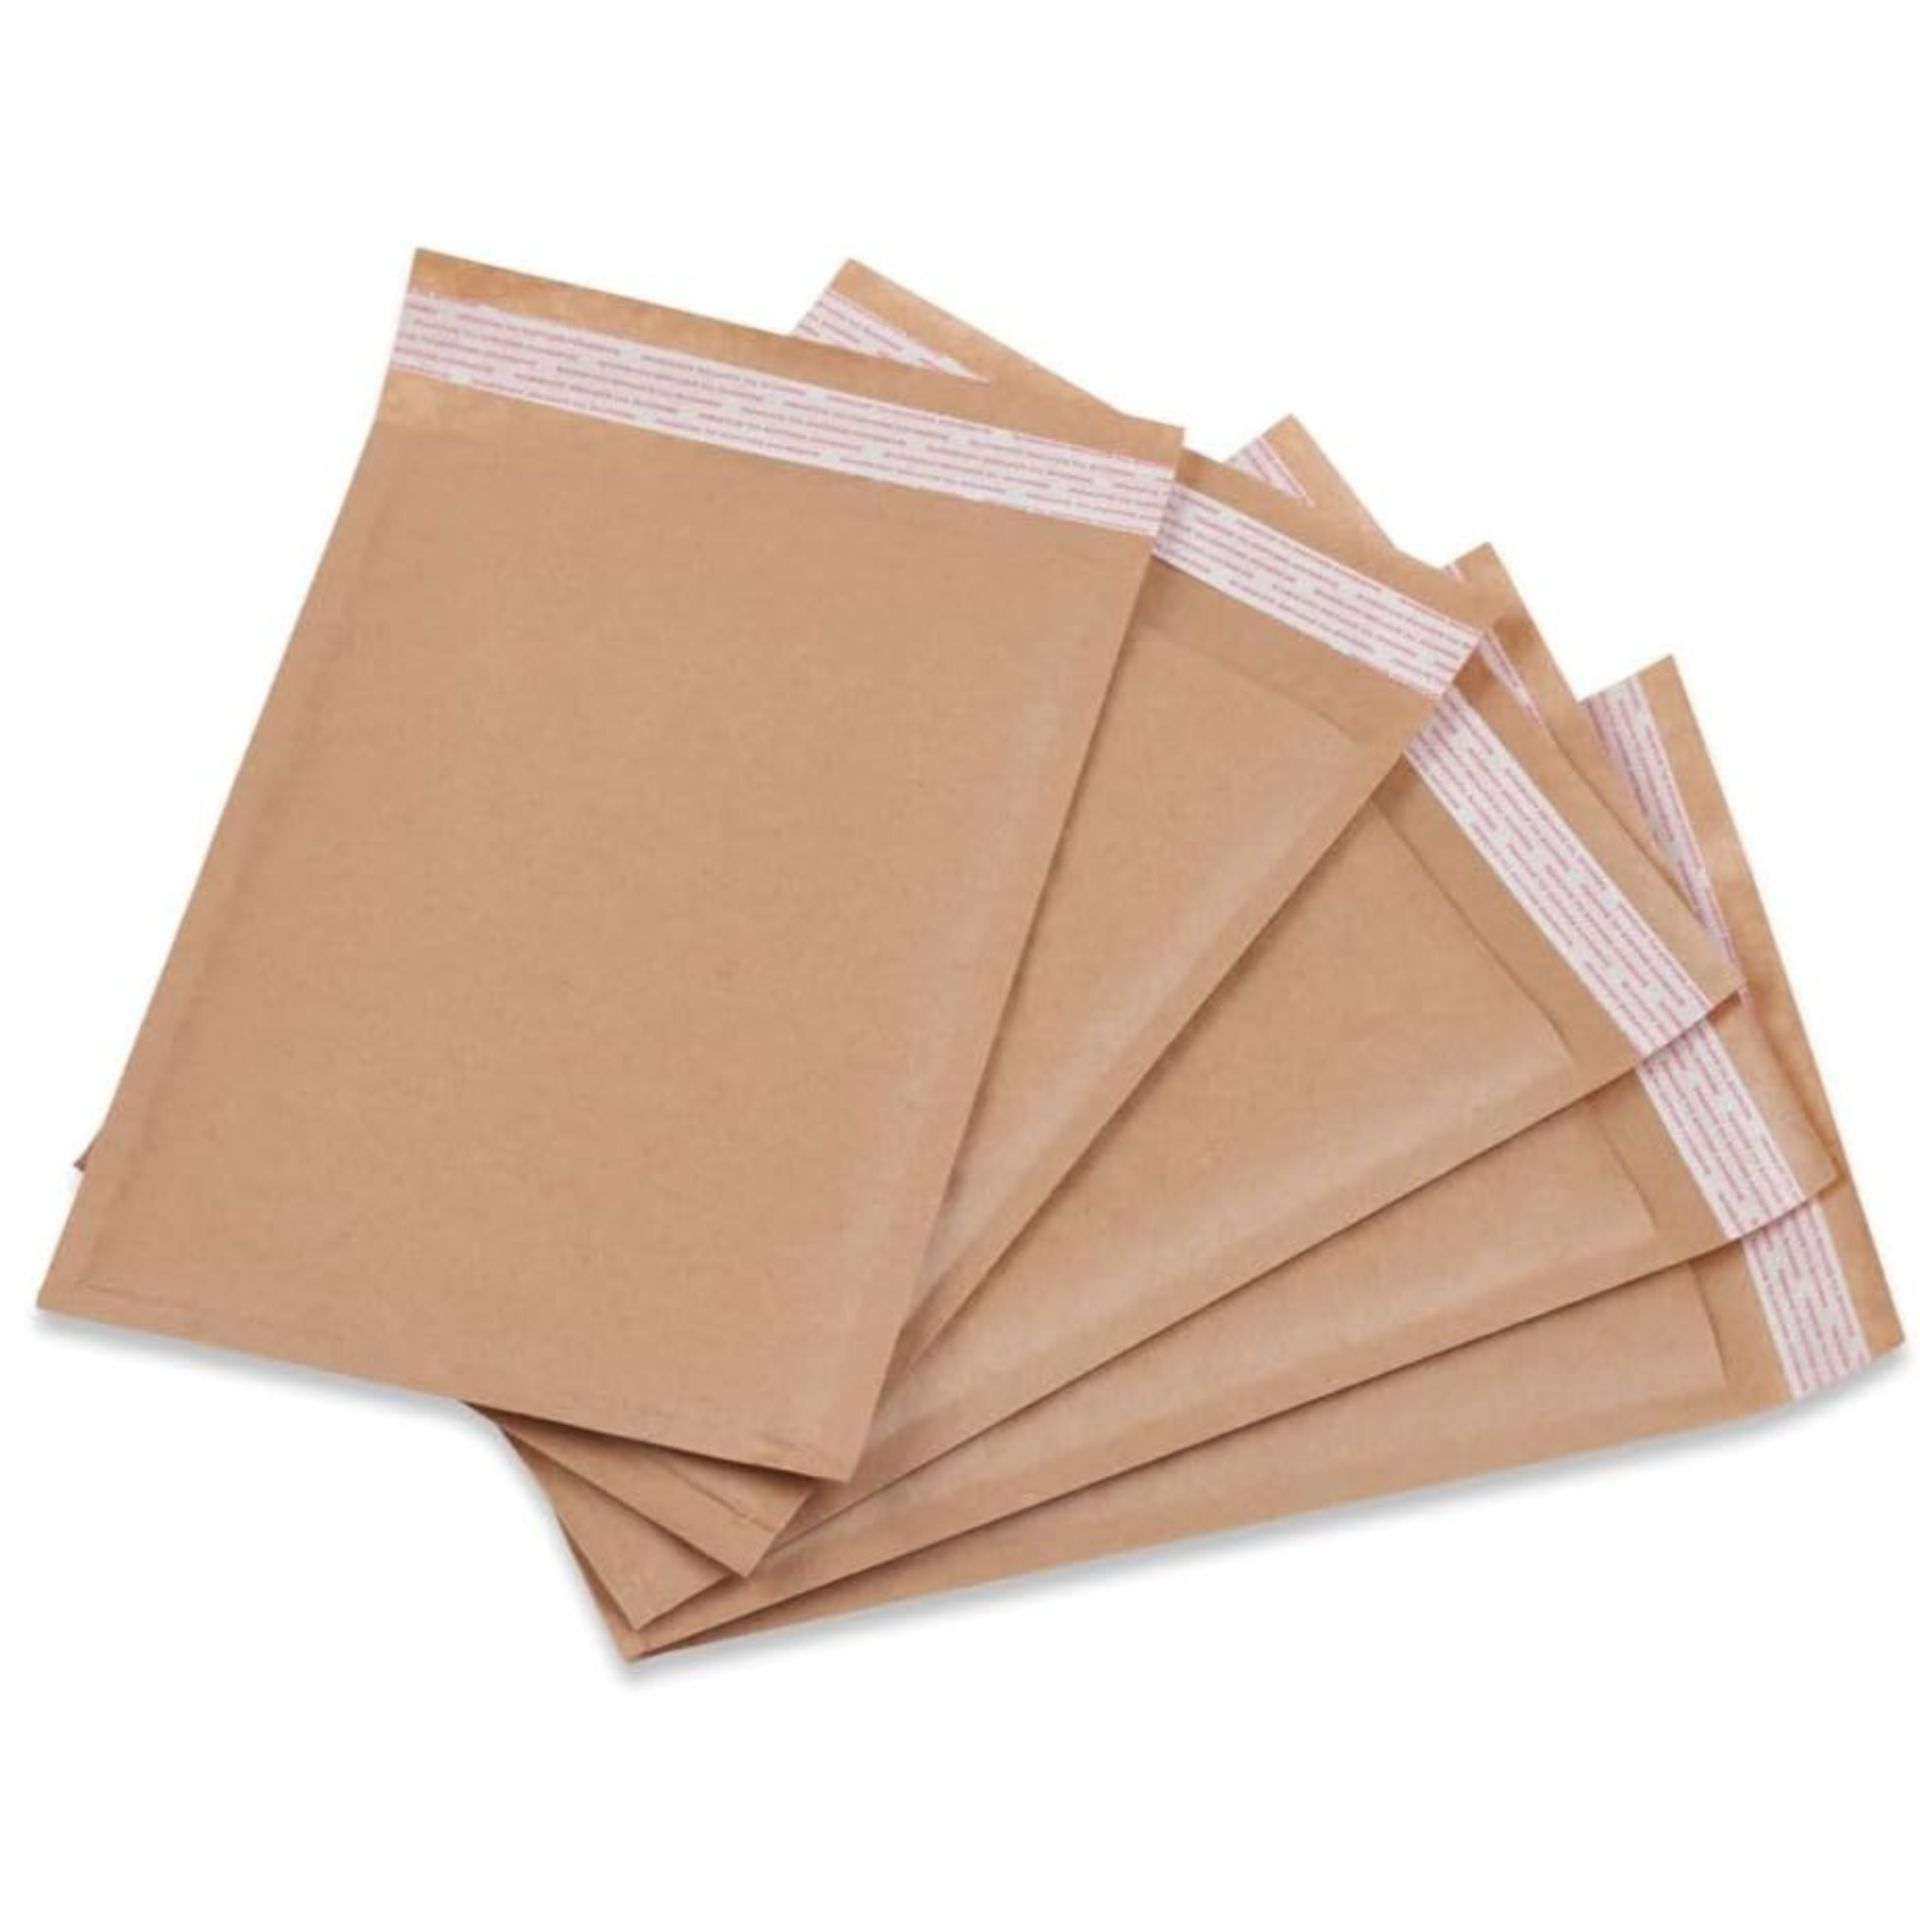 1000 BUBBLE ENVELOPES WITH PEEL AND SEAL TOUGH LIGHT PADDED (170 X 210MM)